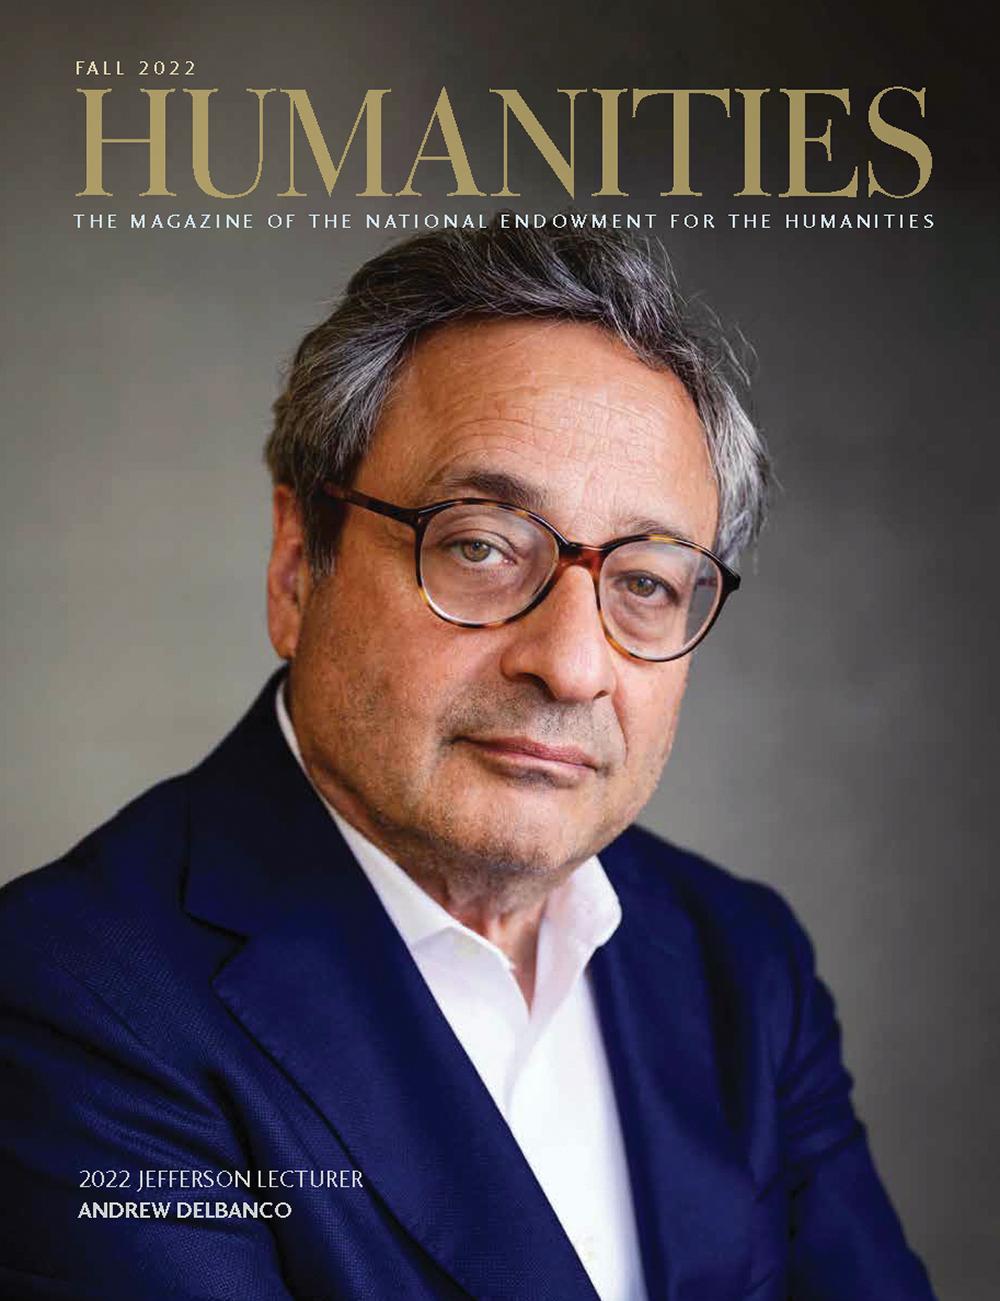 cover of Humanities magazine with portrait of Andrew Delbanco